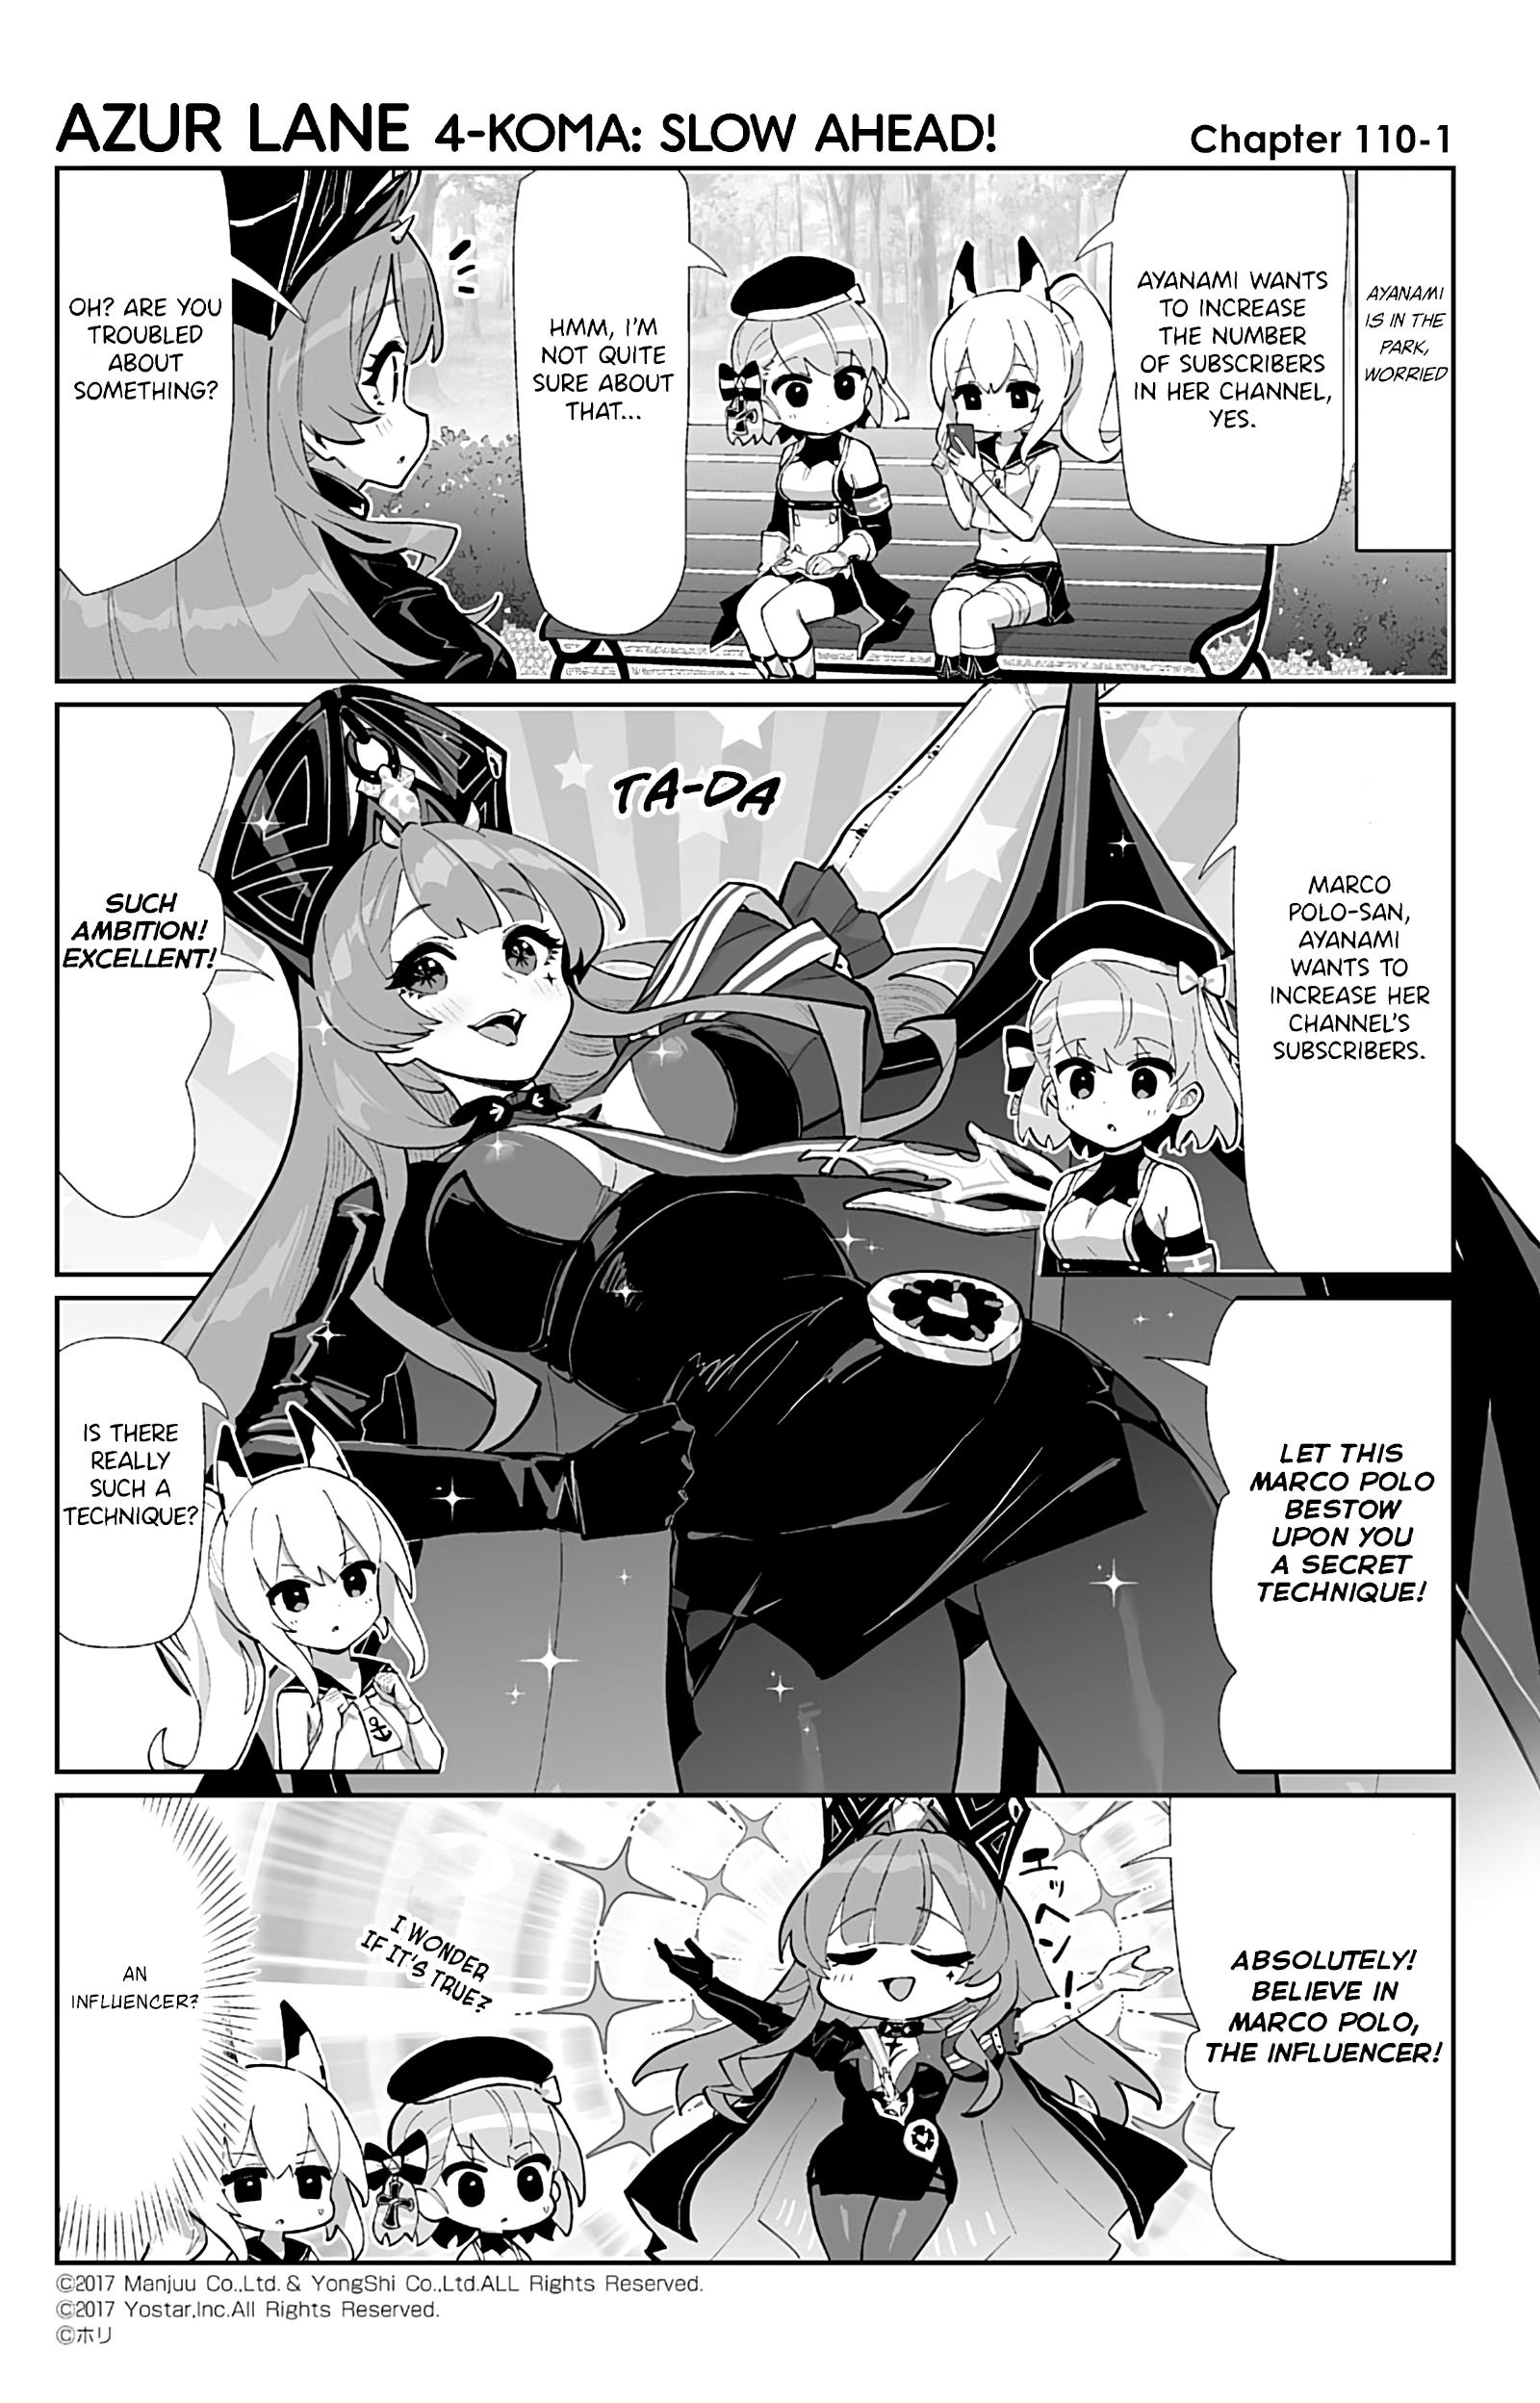 Azur Lane 4-Koma: Slow Ahead Chapter 110: Marco Polo - Picture 1